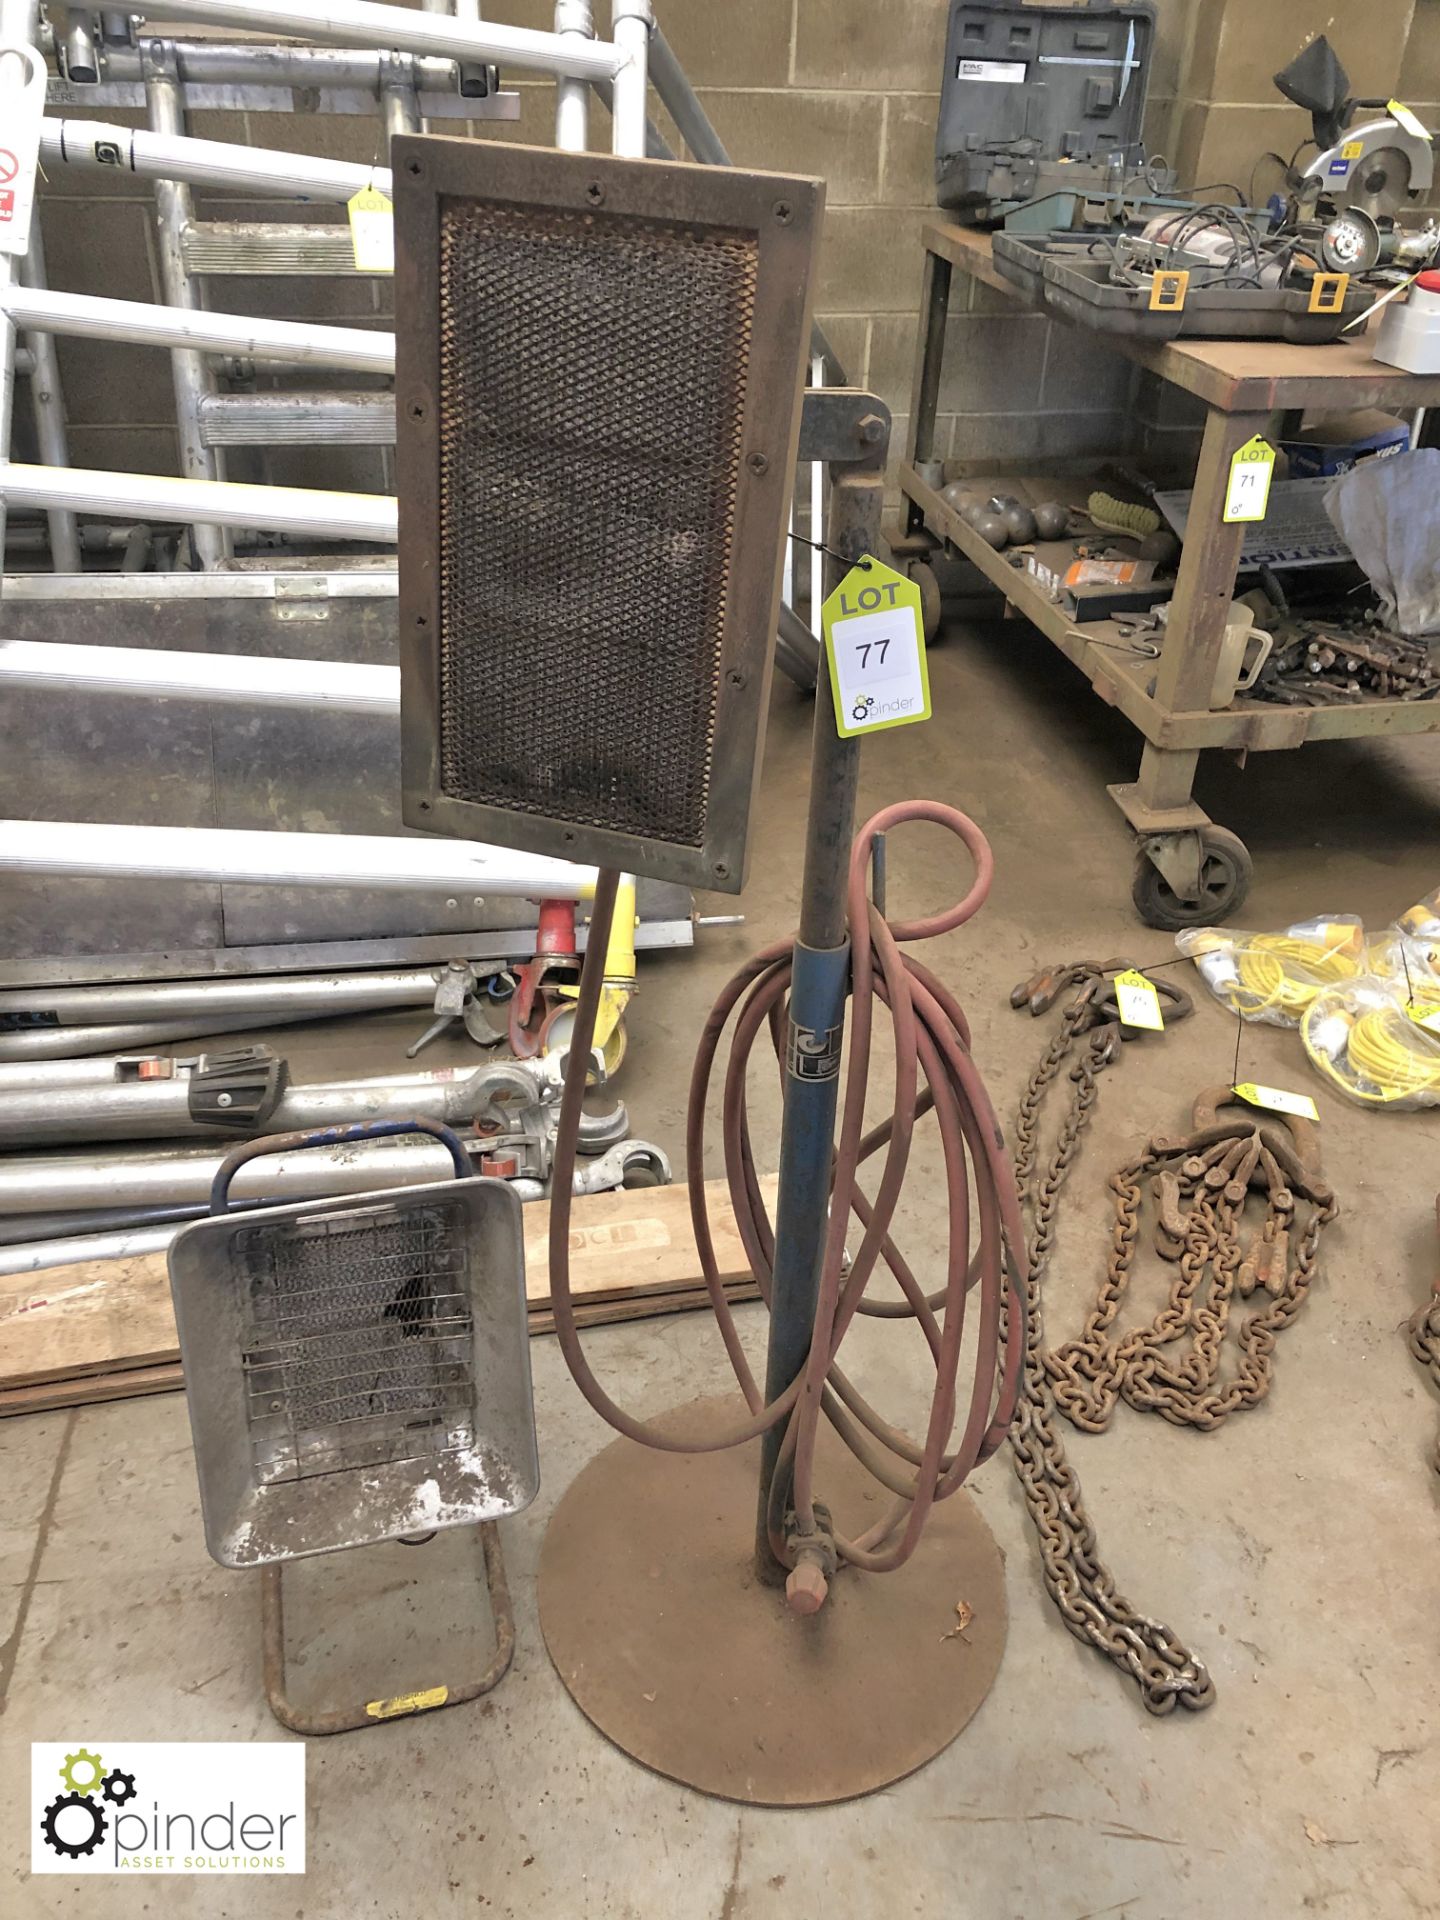 2 various stand mounted gas Heaters